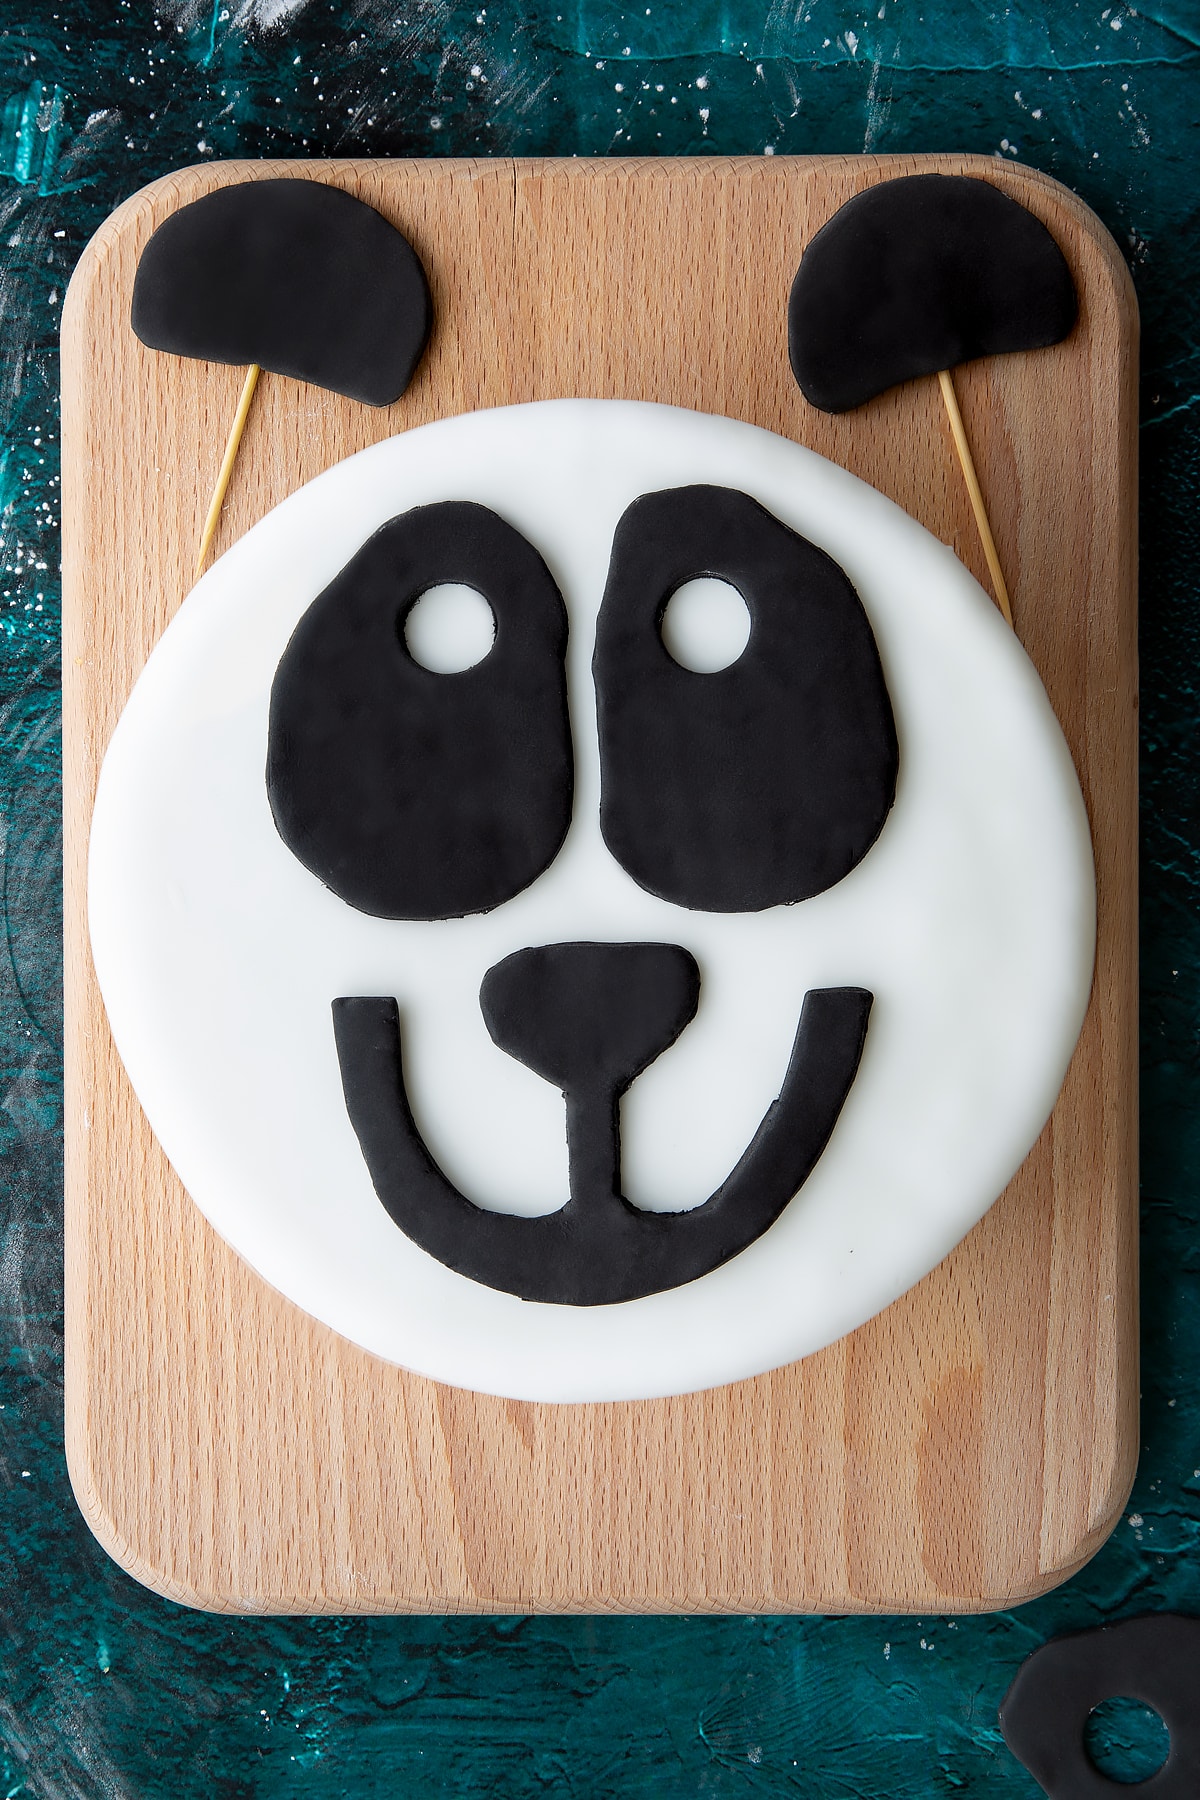 black royal icing panda features on a white royal icing covered cake on a green marble background with two black ears at the top.